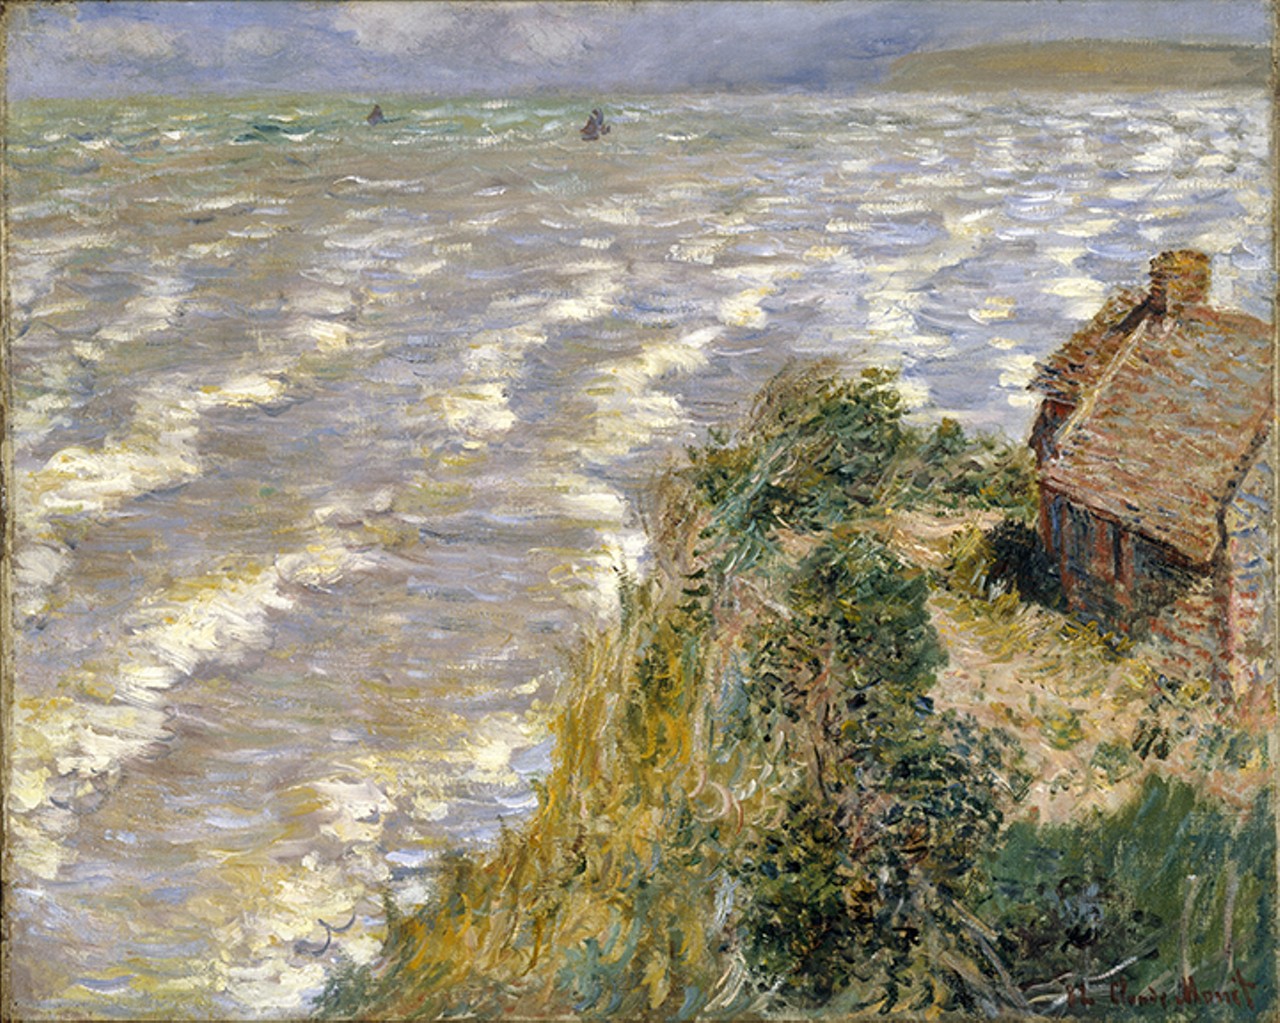 Claude Monet (French, 1840&#150;1926). Rising Tide at Pourville, 1882. Oil on canvas, 26 x 32 in. (66 x 81.3cm). Brooklyn Museum, Gift of Mrs. Horace O. Havemeyer, 41.1260. (Photo: Brooklyn Museum)